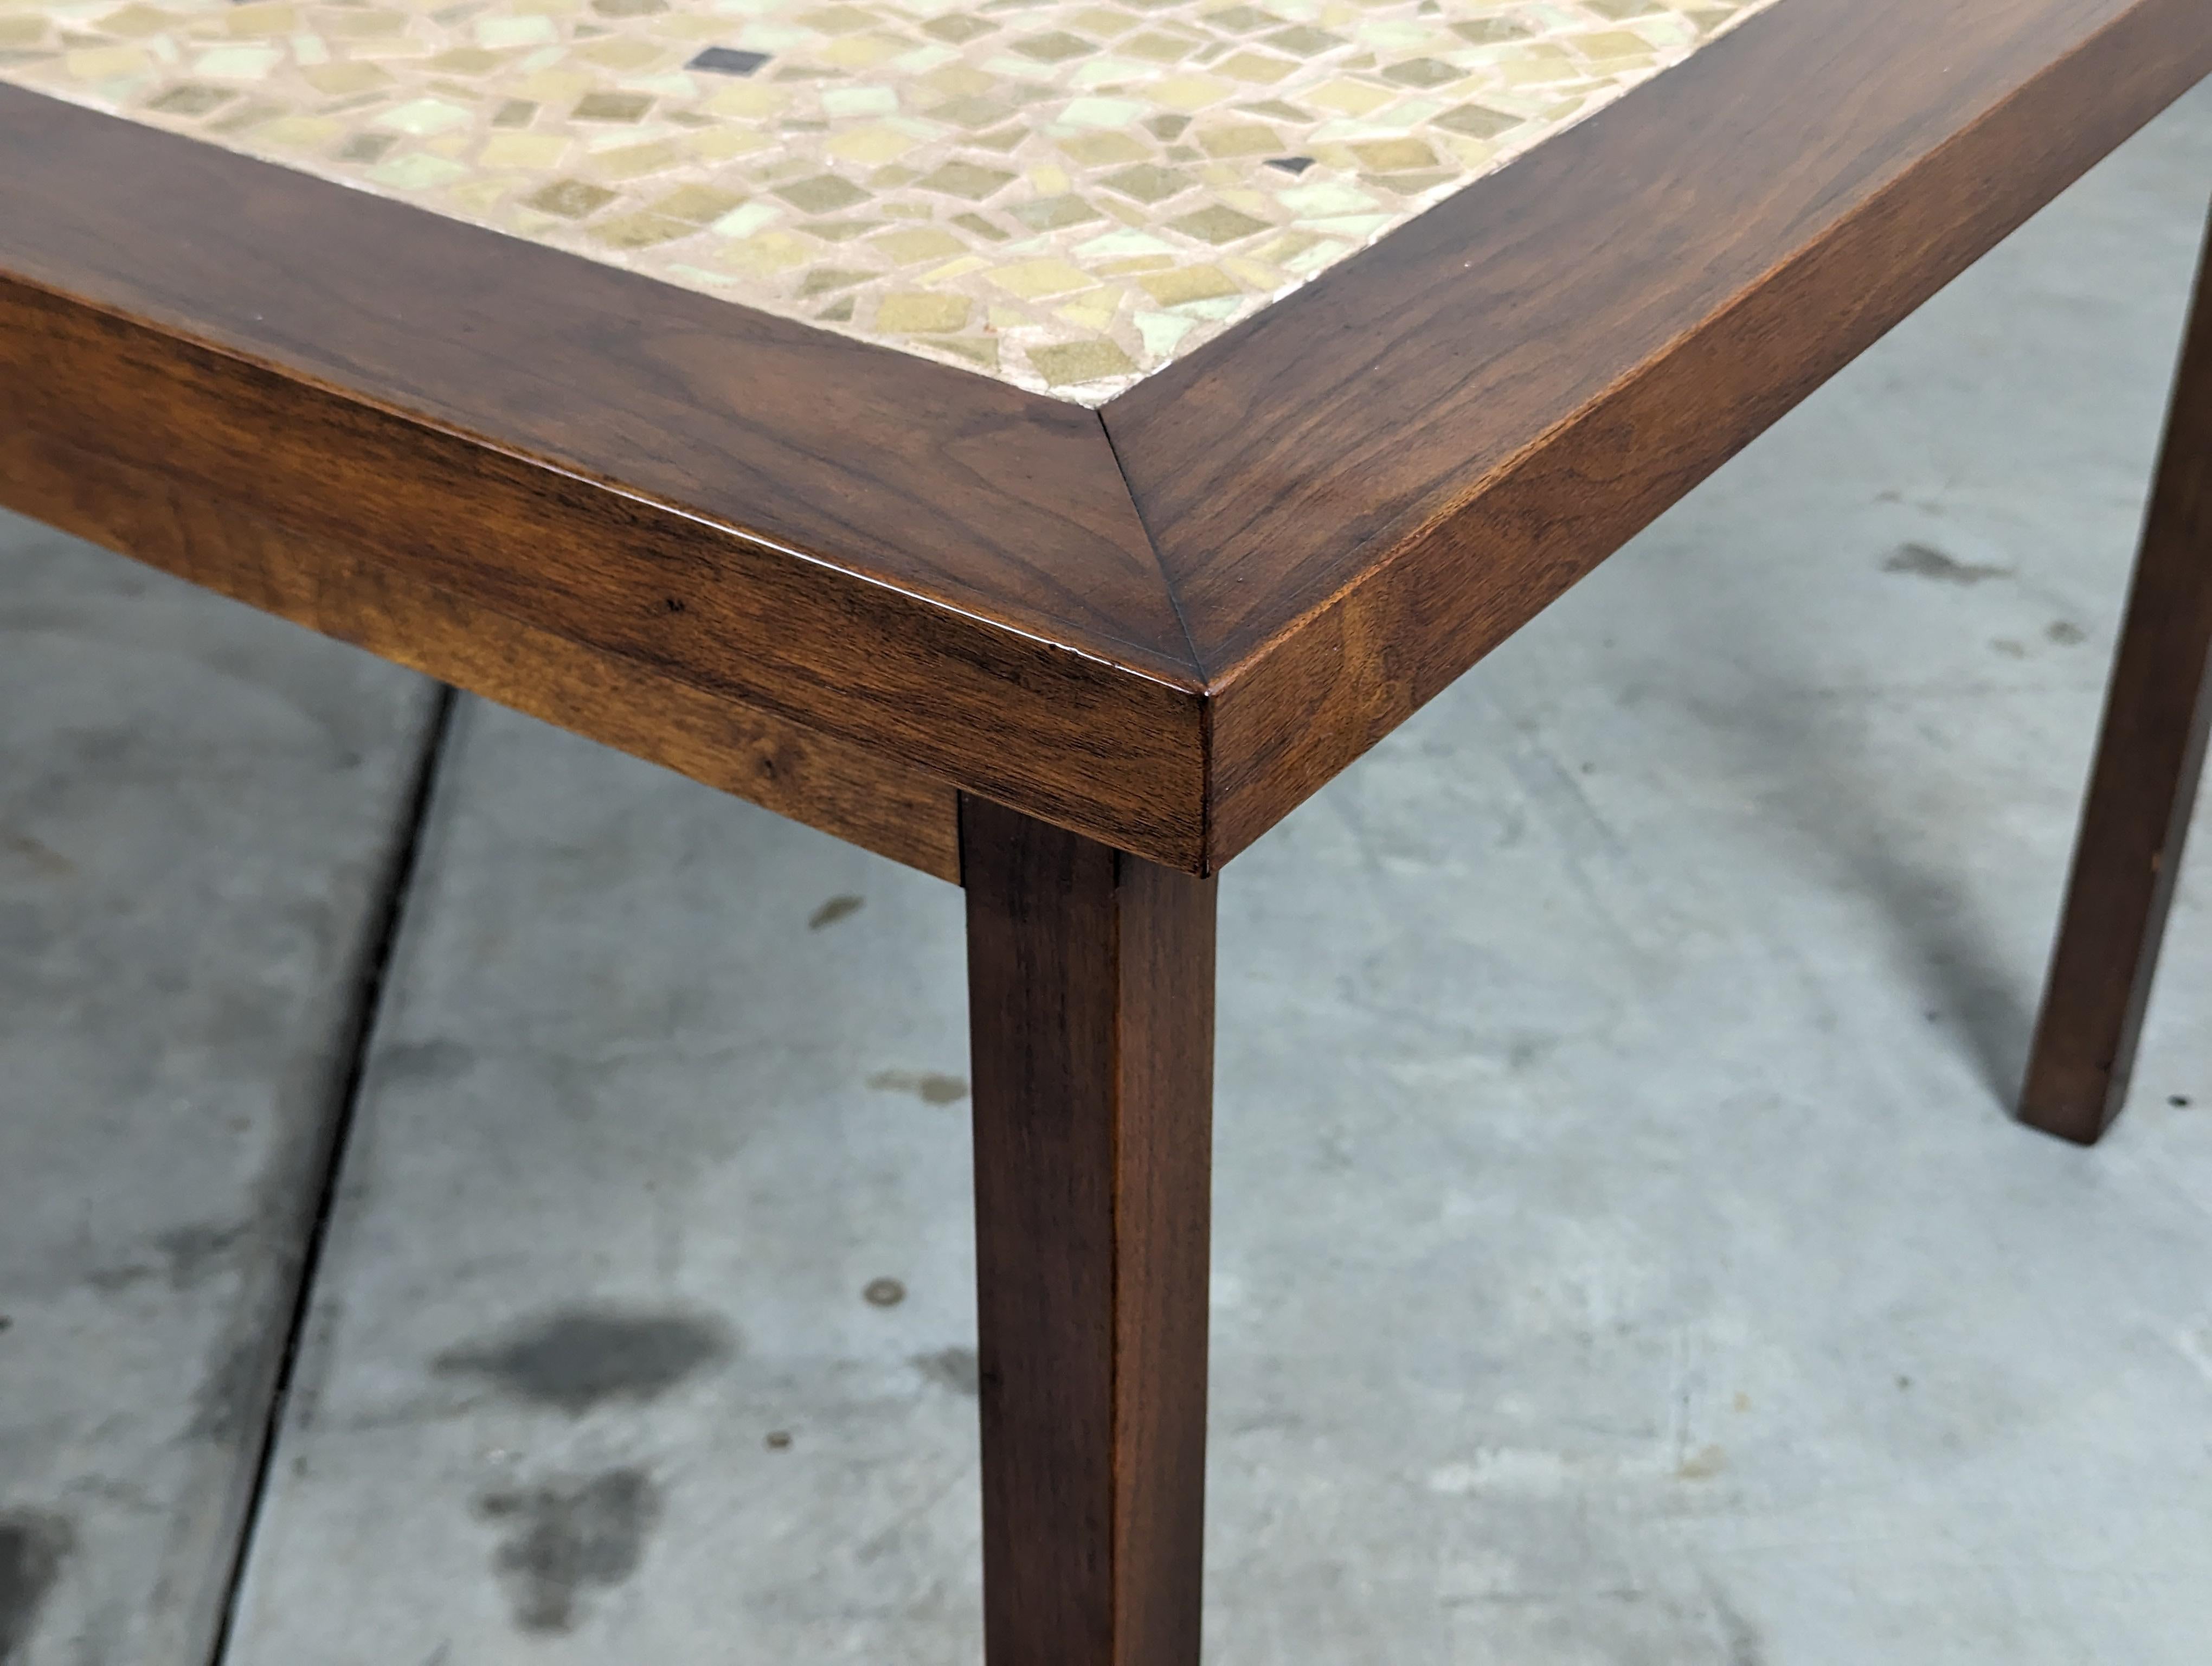 Mid Century Modern Walnut Dining Table with Mosaic Ceramic Tiled Top, c1970s For Sale 3